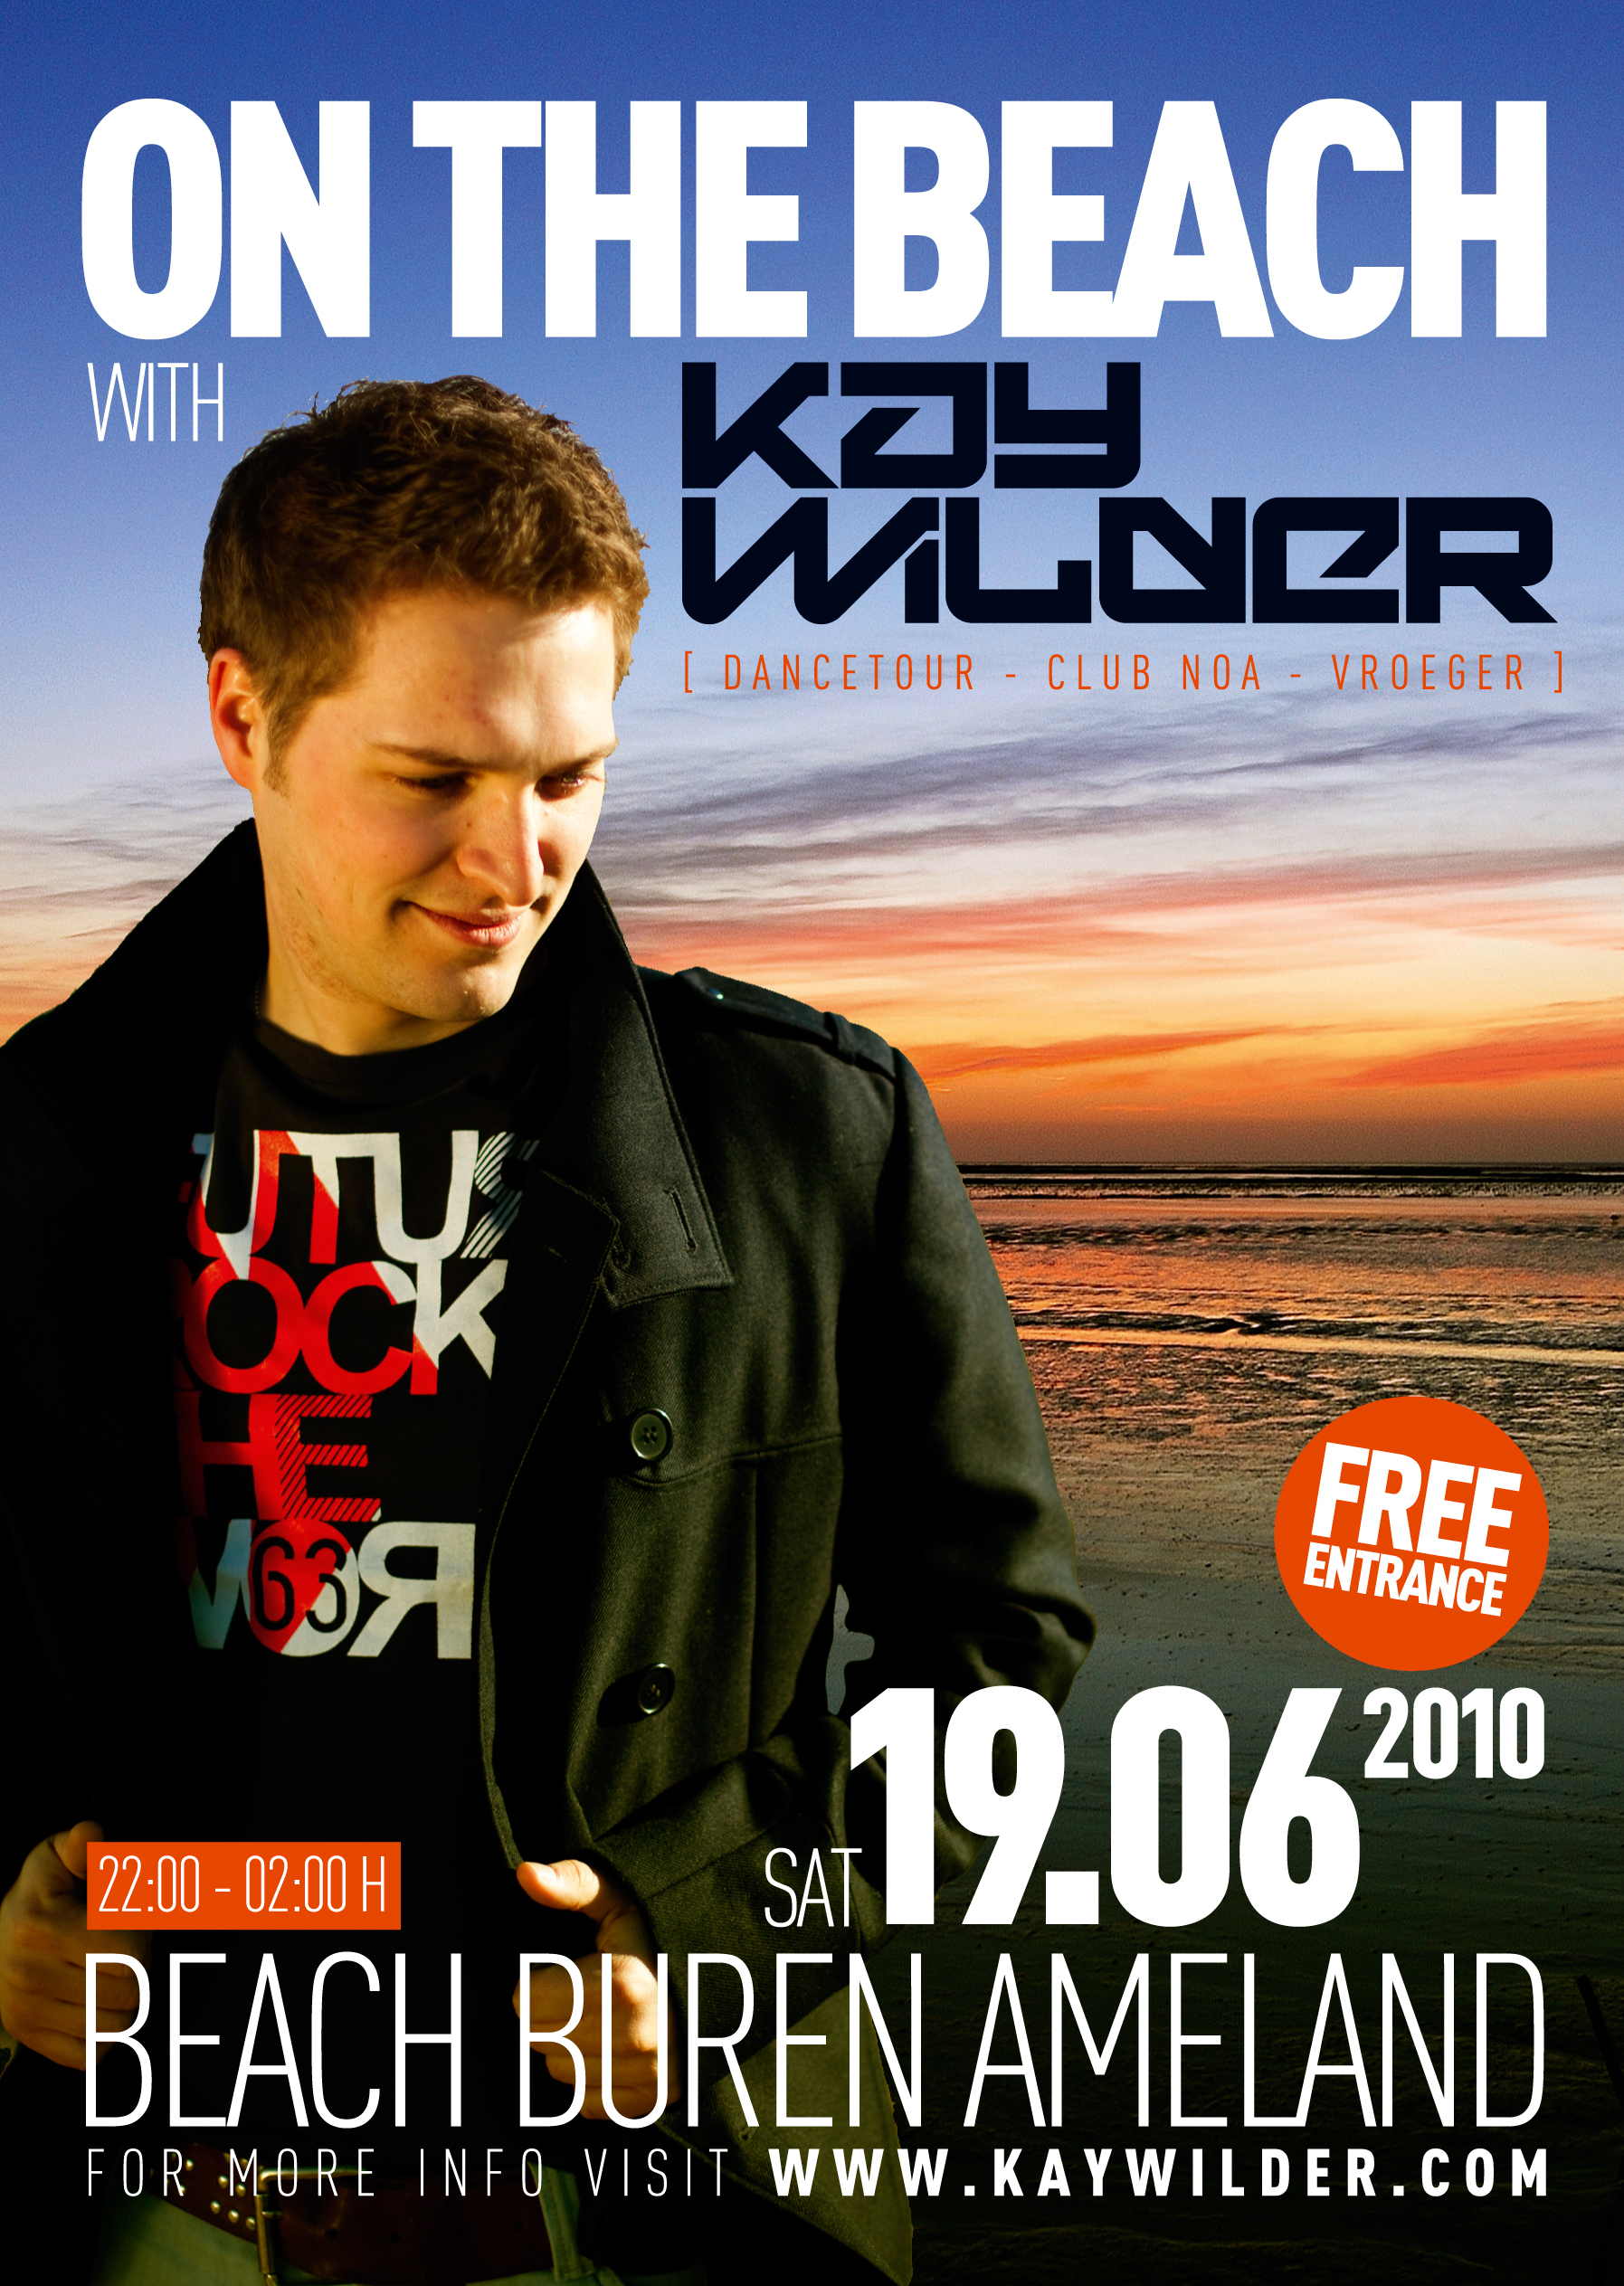 19.06 On The Beach with Kay Wilder